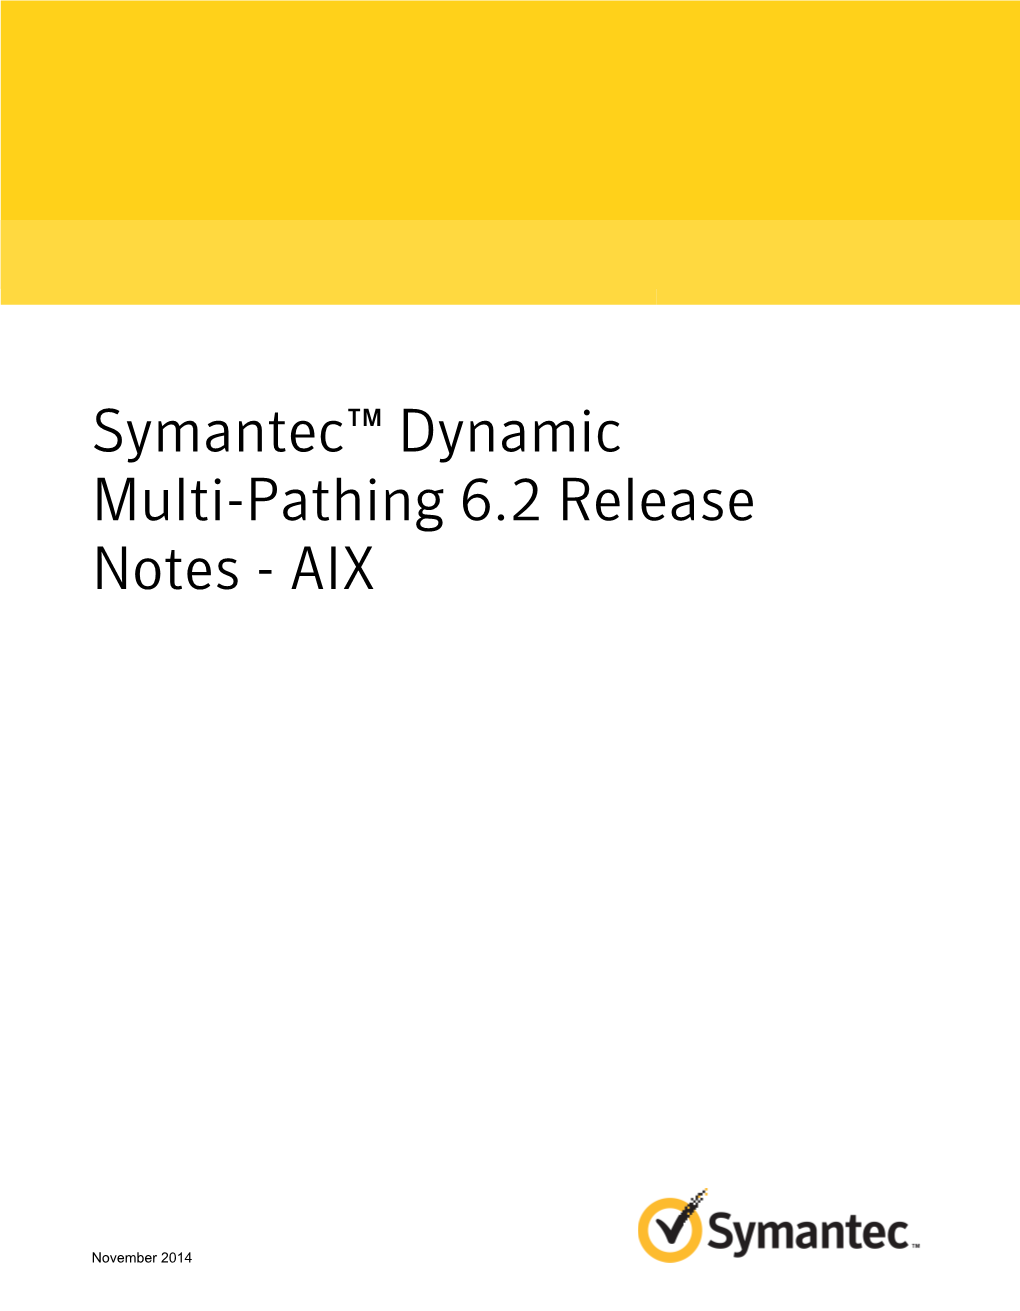 Symantec™ Dynamic Multi-Pathing 6.2 Release Notes - AIX